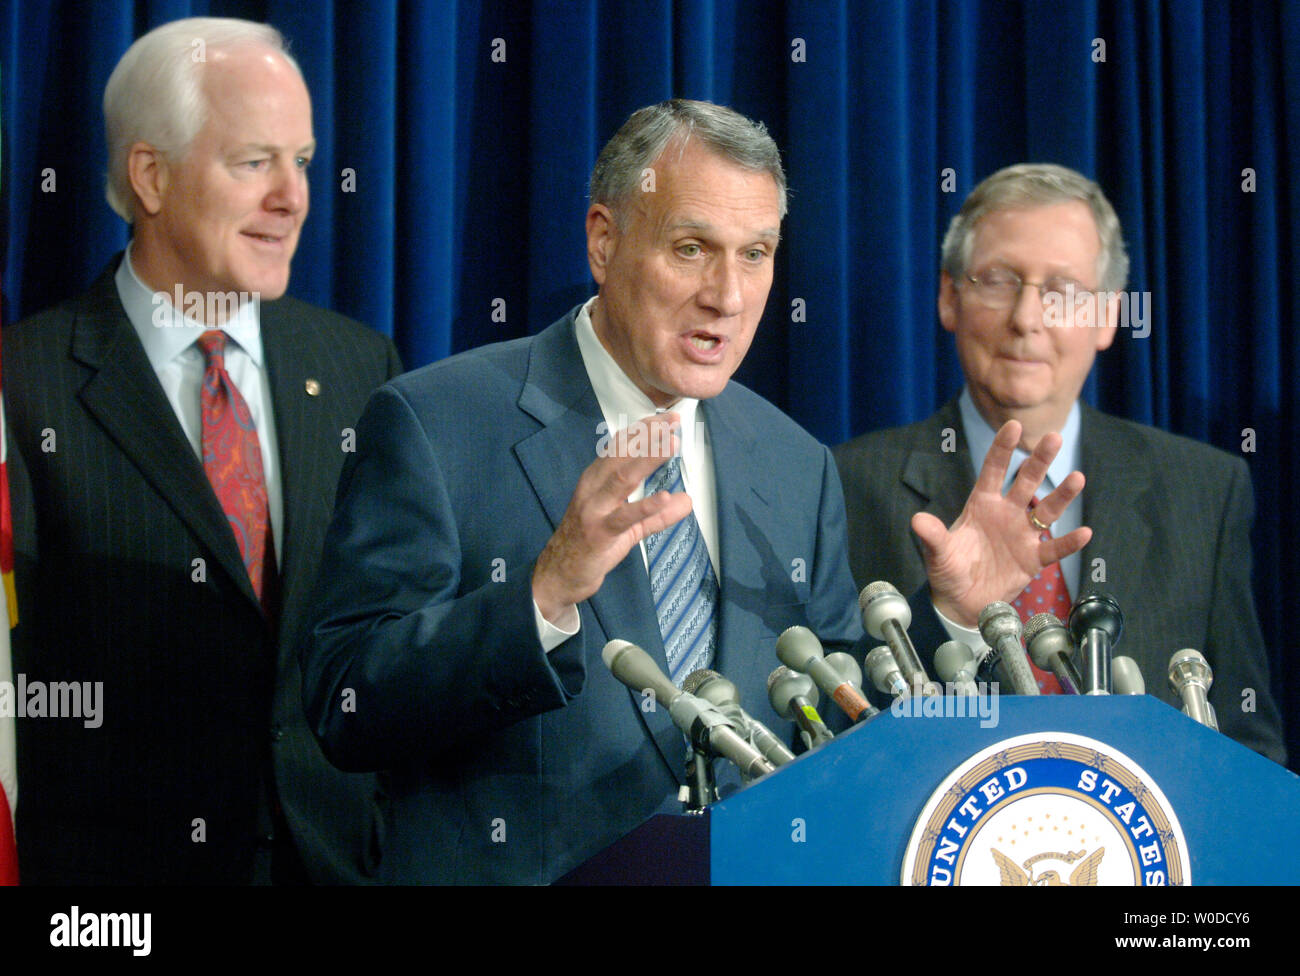 Sen. John Kyl (R-AZ) (C) speaks about the Senate GOP Agenda for the 110th Congress, in Washington on February 15, 2007. Kyl was joined by Sen. John Cornyn (R-TX) (L) and Senate Minority Leader Mitch McConnell (R-KY). (UPI Photo/Kevin Dietsch) Stock Photo